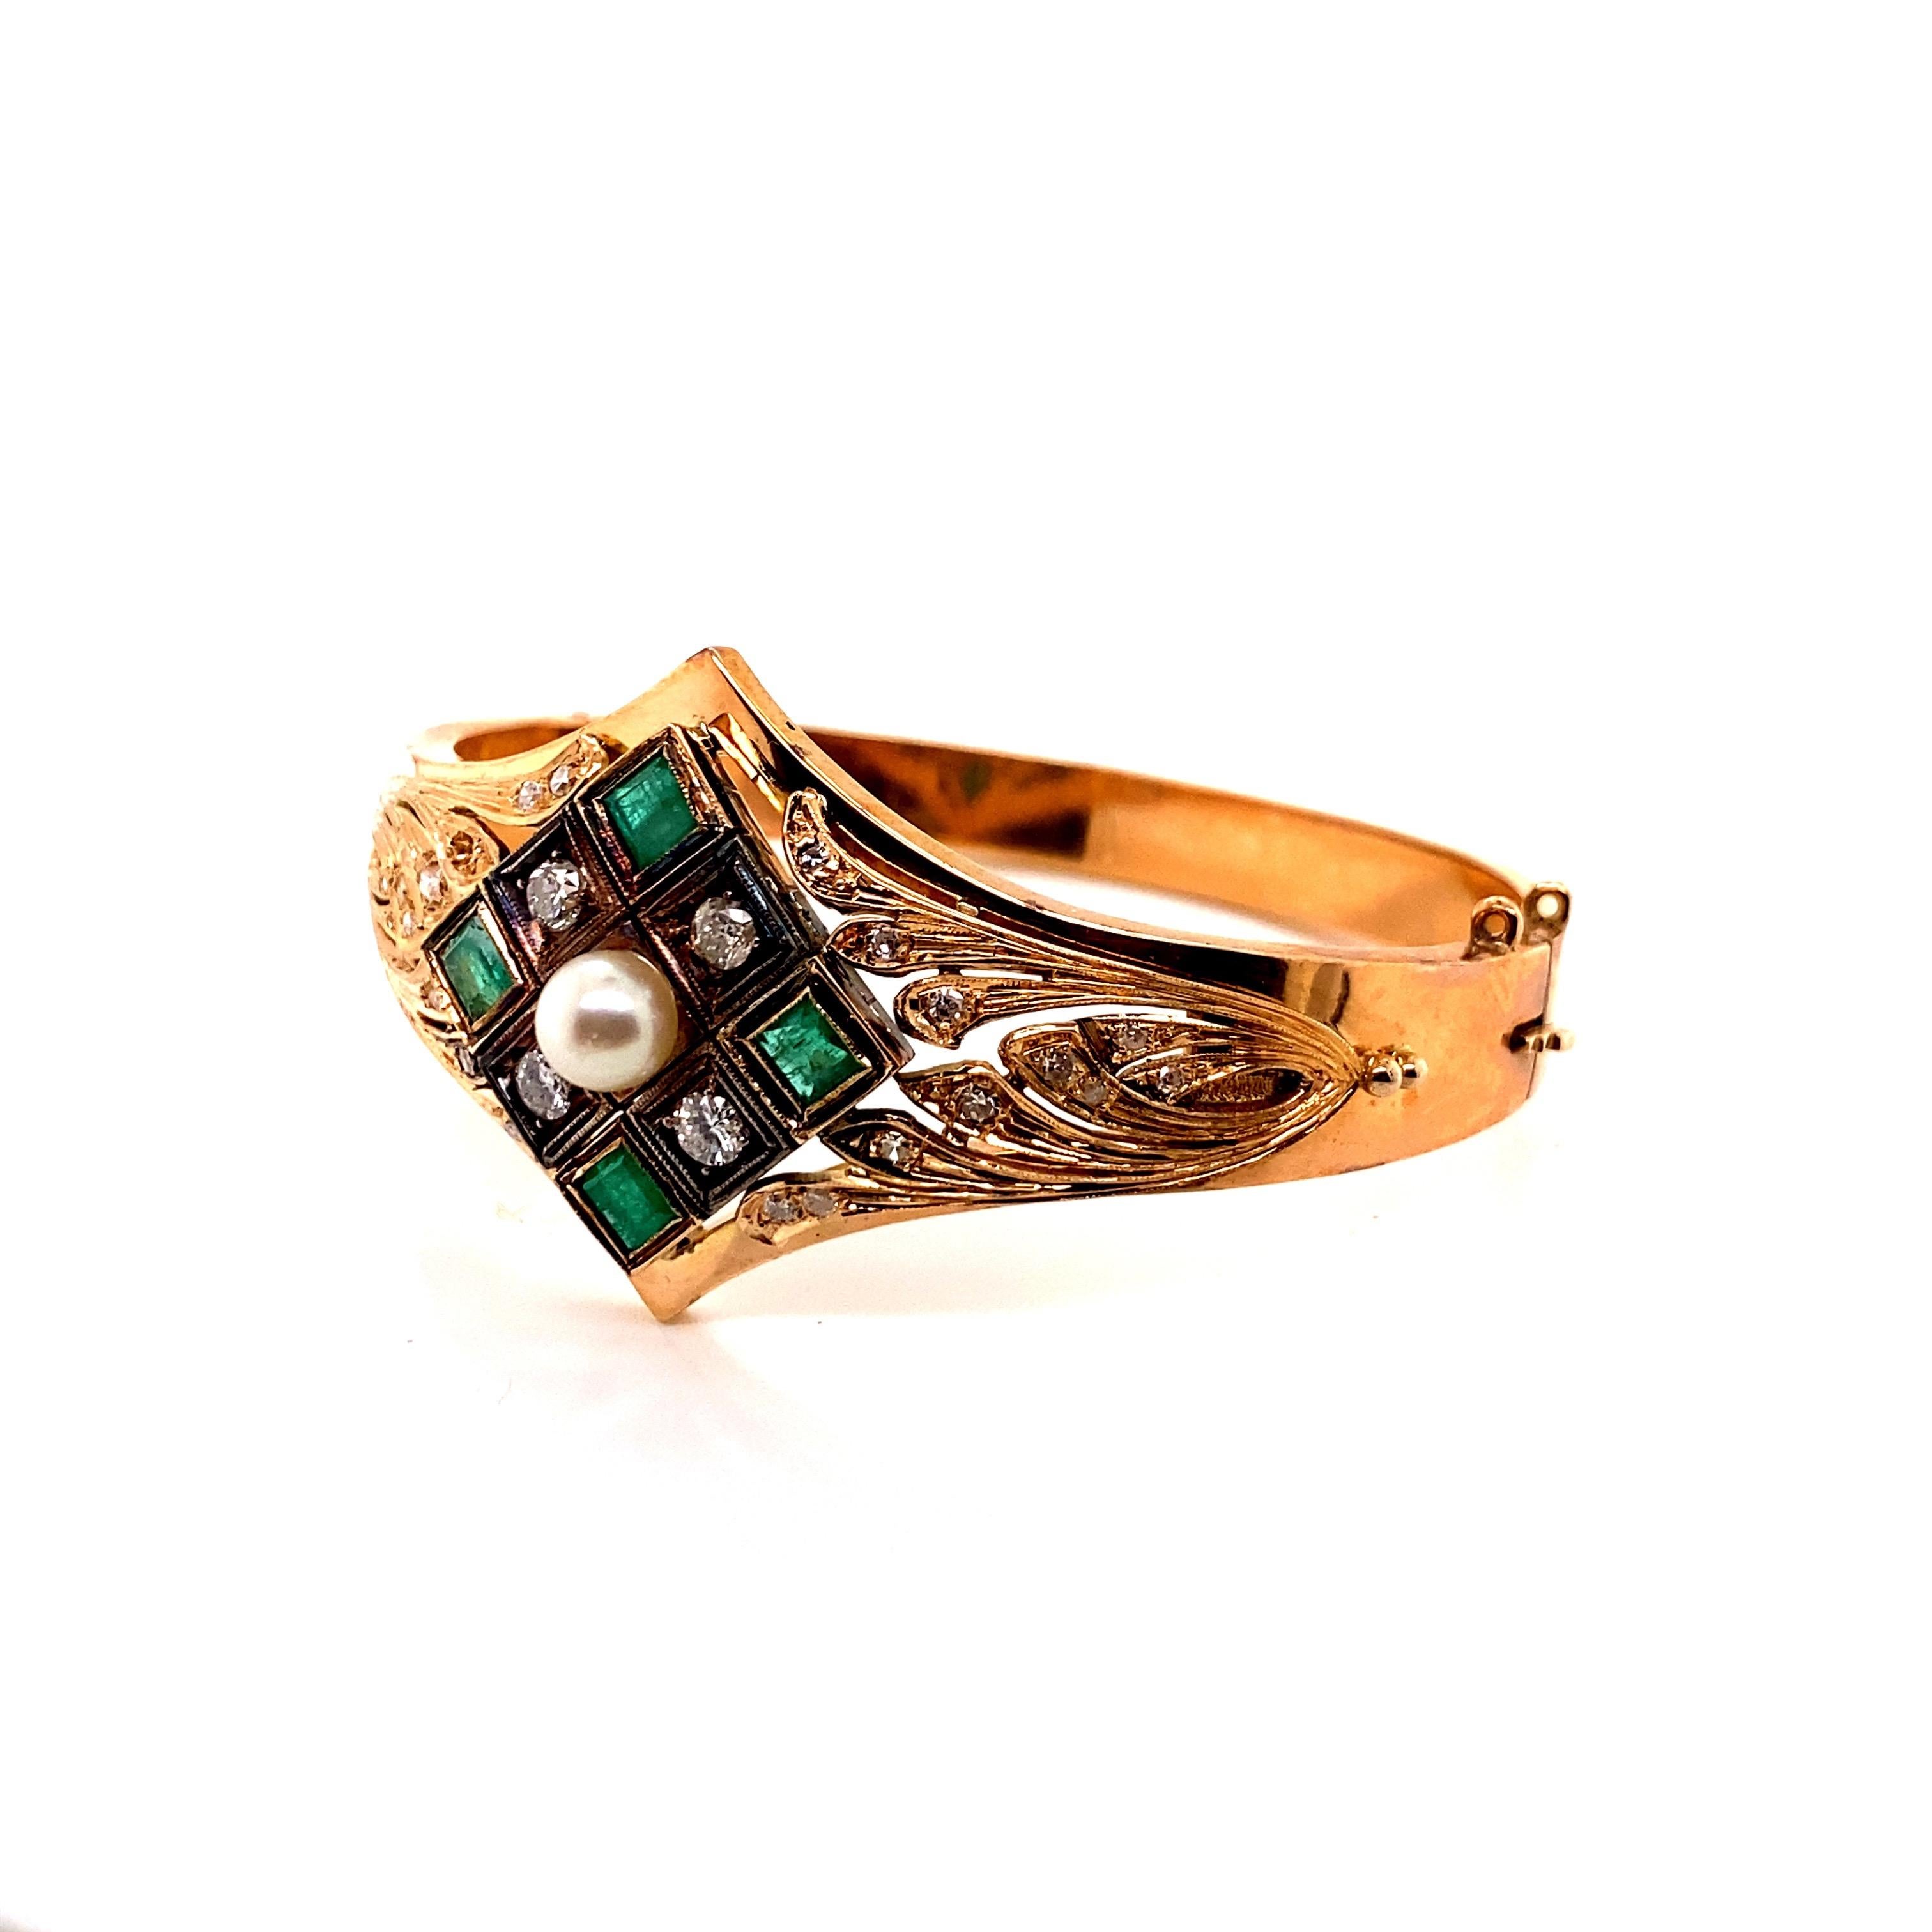 Vintage 14K Rose Gold Bangle Bracelet with Emeralds and Diamonds and Pearl - There are 4 square cut emeralds that measure about 3.5mm in diameter and weigh approximately .80ct total weight. There are 4 round diamonds that weigh approximately .40ct